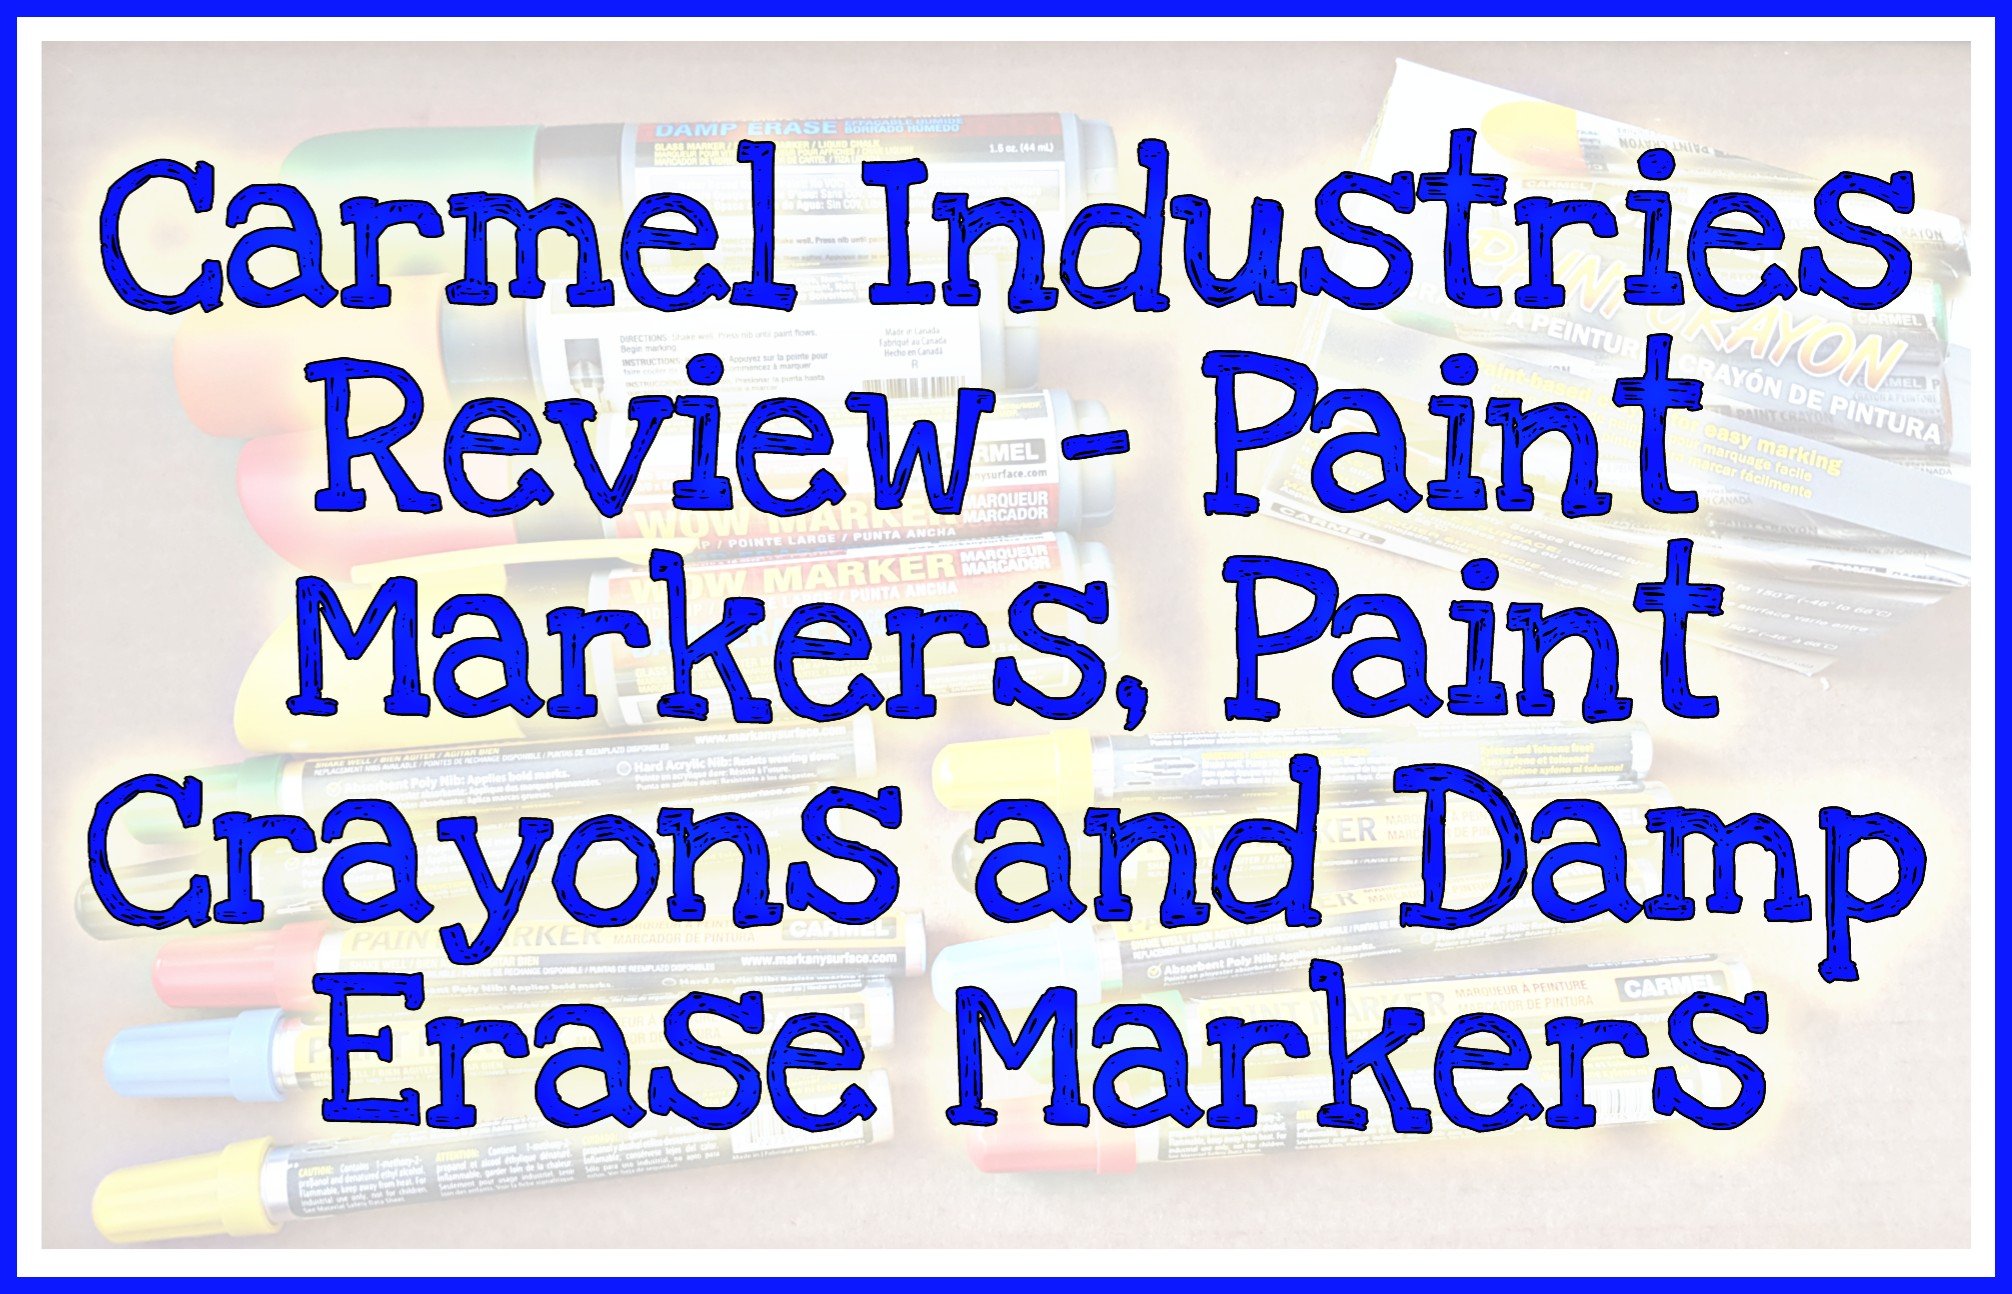 Faint picture of markers as background to title 'Carmel Industries Review - Paint Markers, Paint Crayons and Damp Erase Markers'